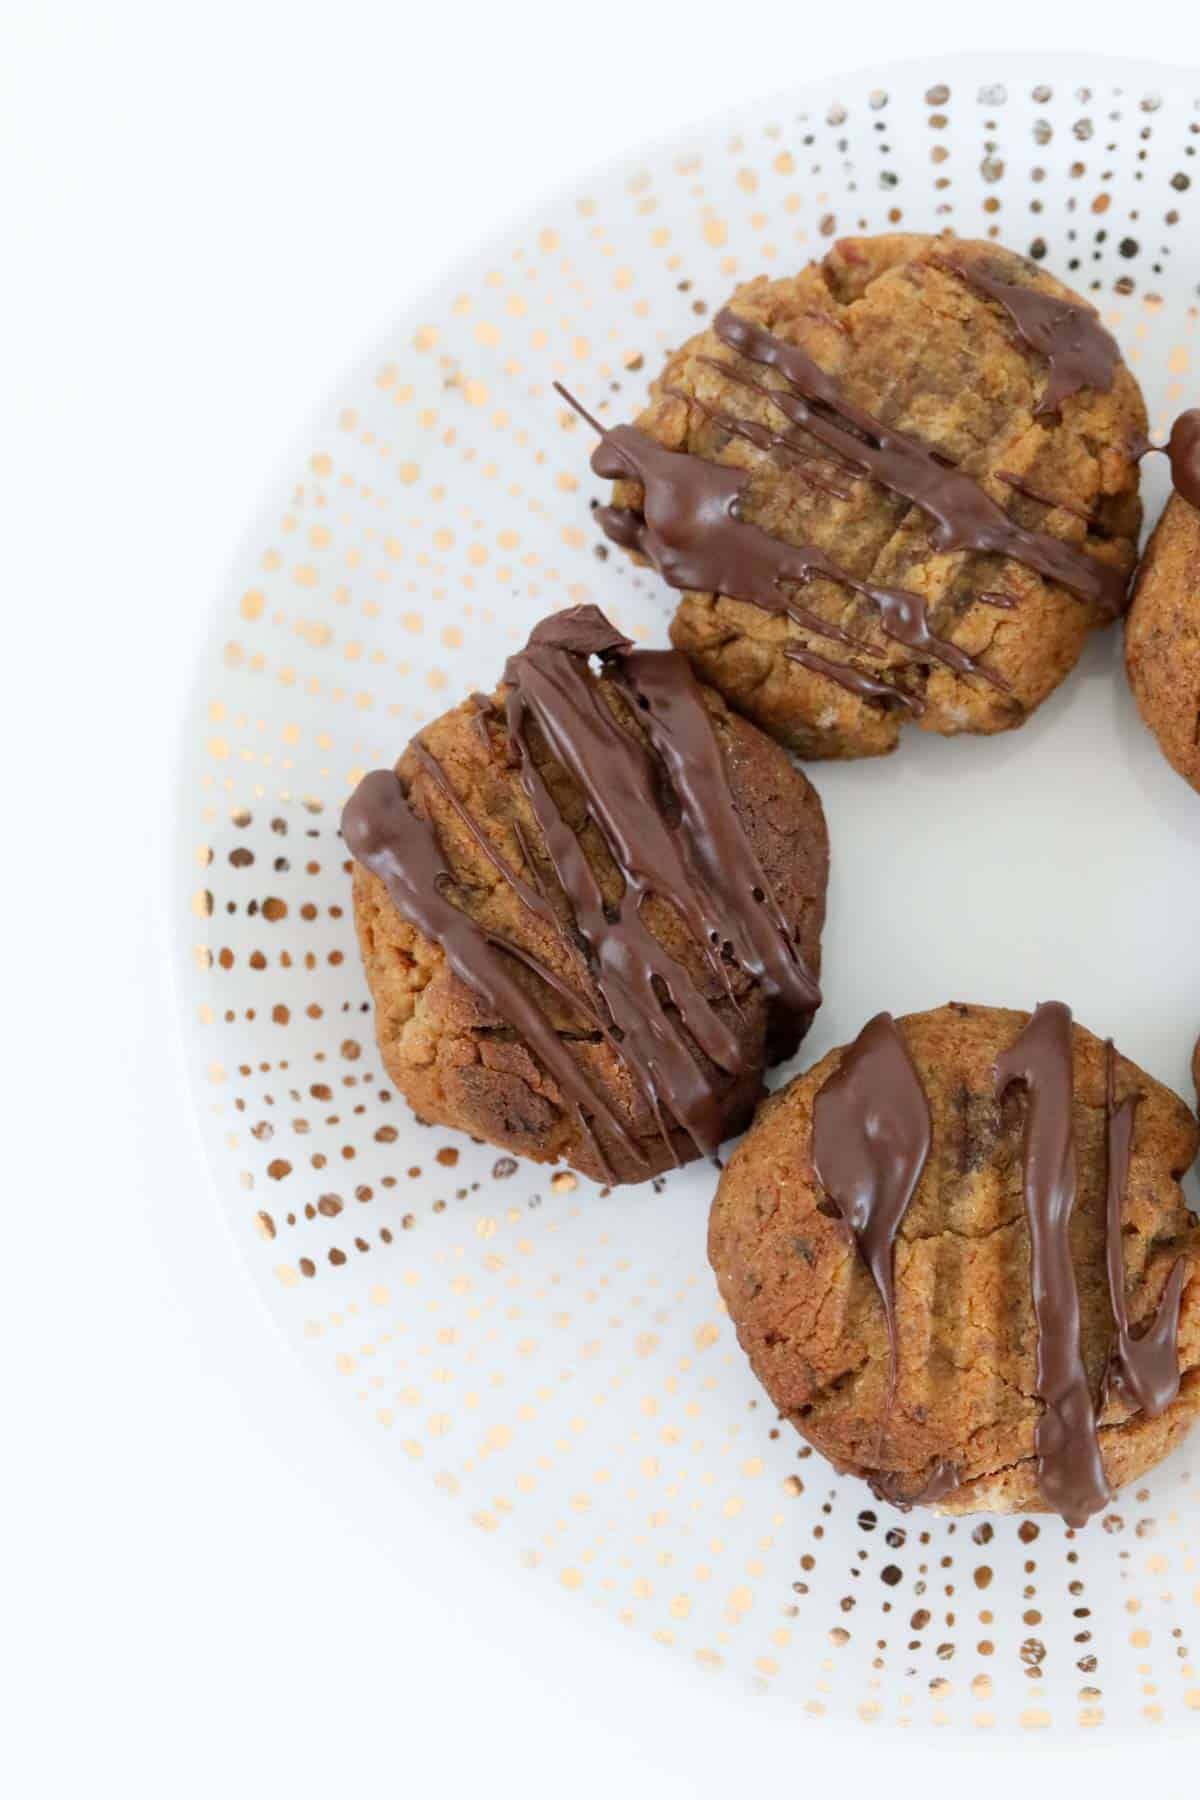 sticky date cookies drizzled with chocolate on a plate.